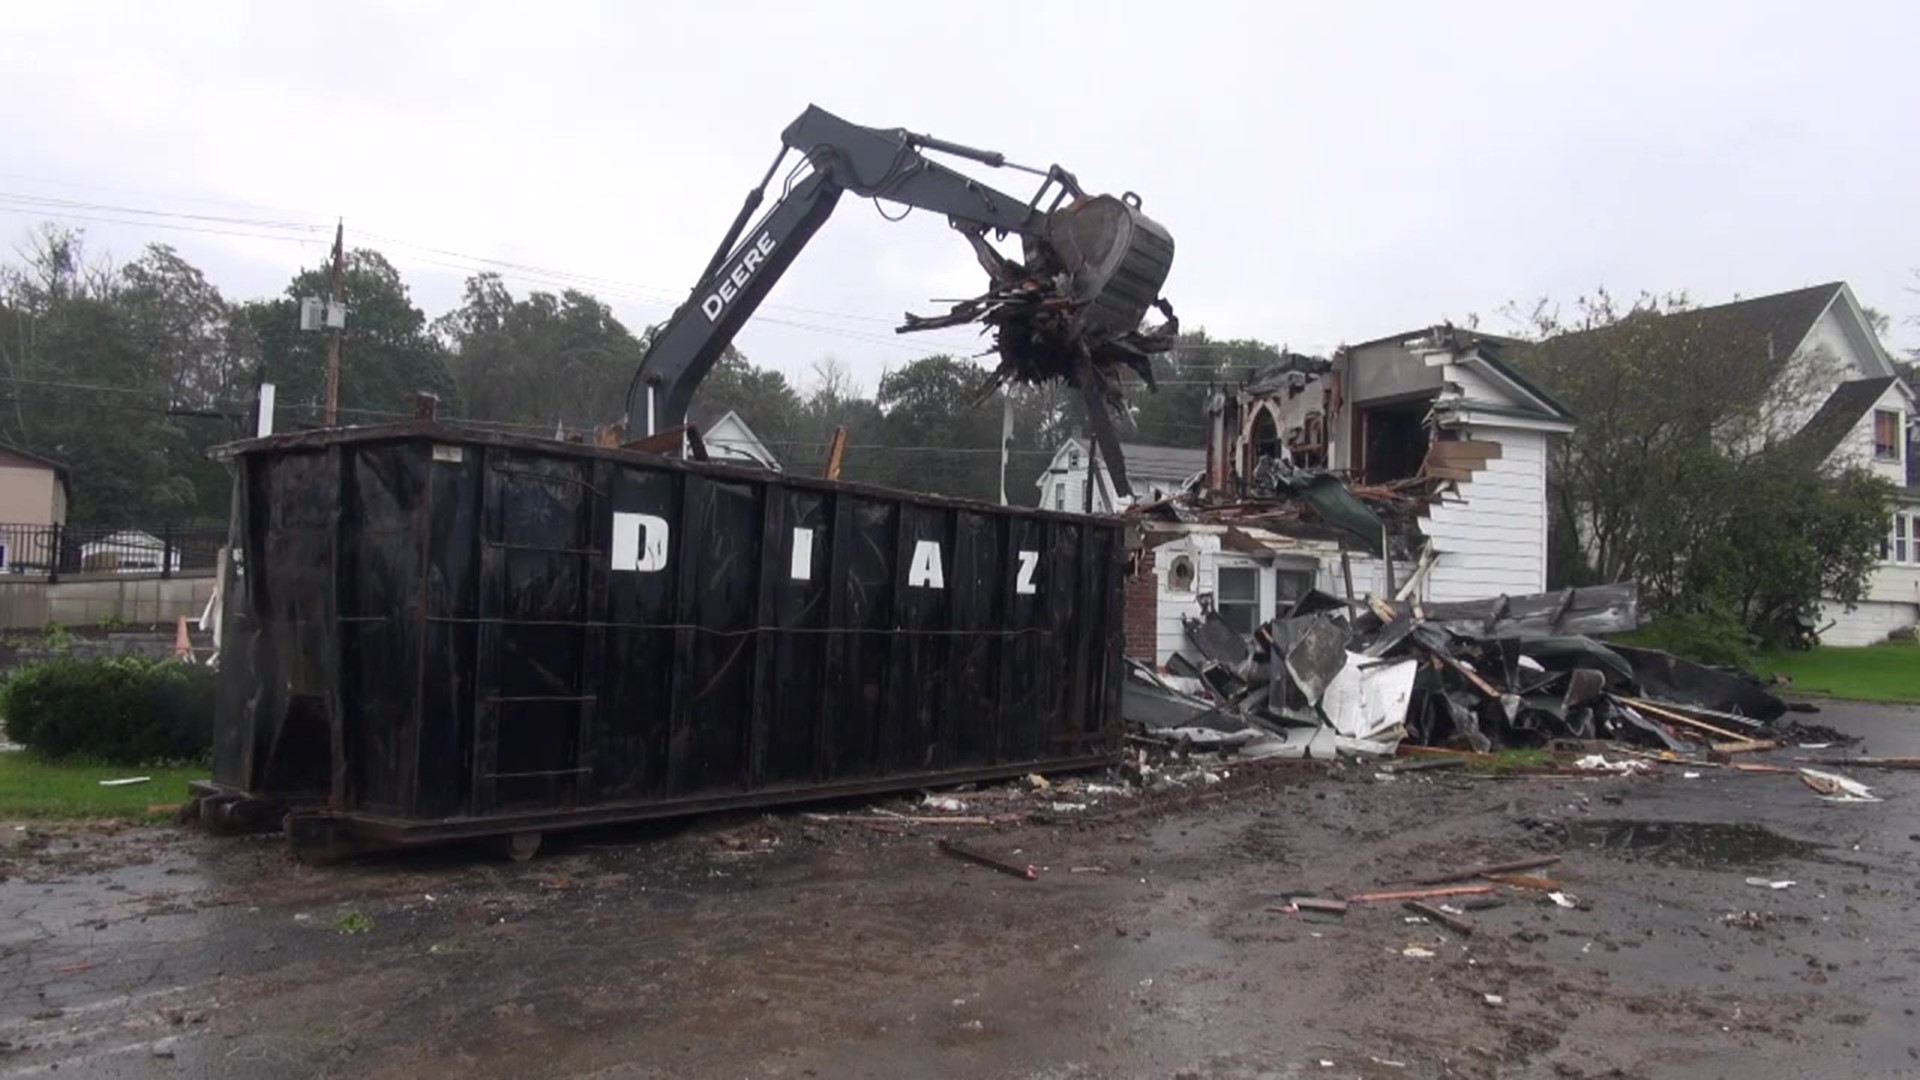 The building in Susquehanna County was struck by lightning and caught fire last month. It was torn down Tuesday.